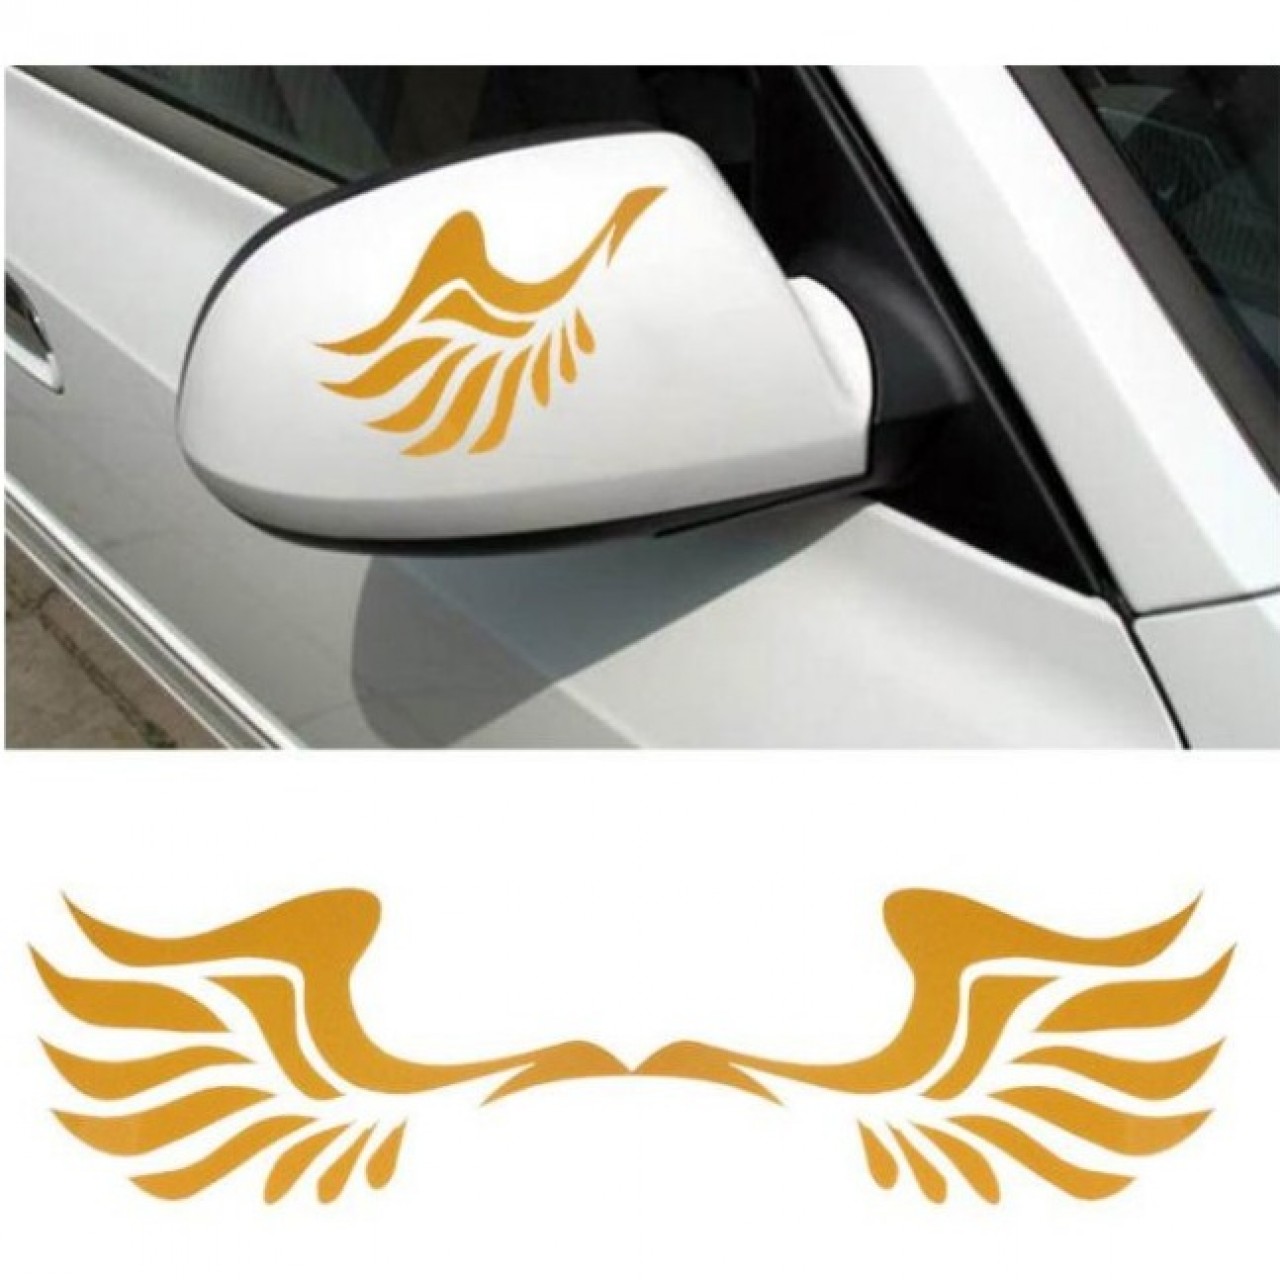 Mirror Pair of Wings Car Styling Stickers - Yellow